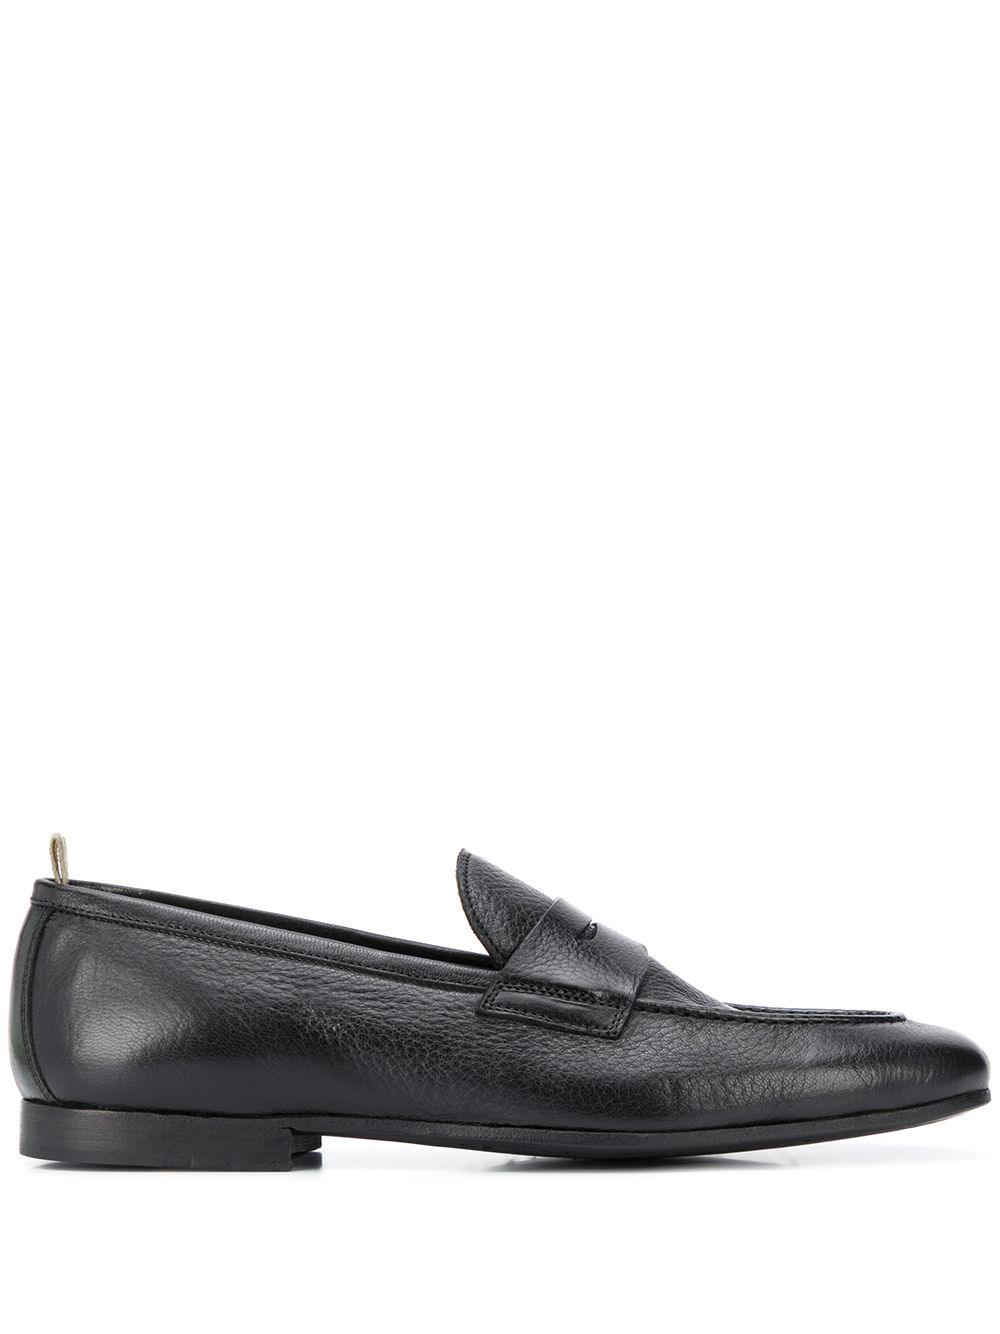 OFFICINE CREATIVE BYRON ALMOND-TOE LOAFERS